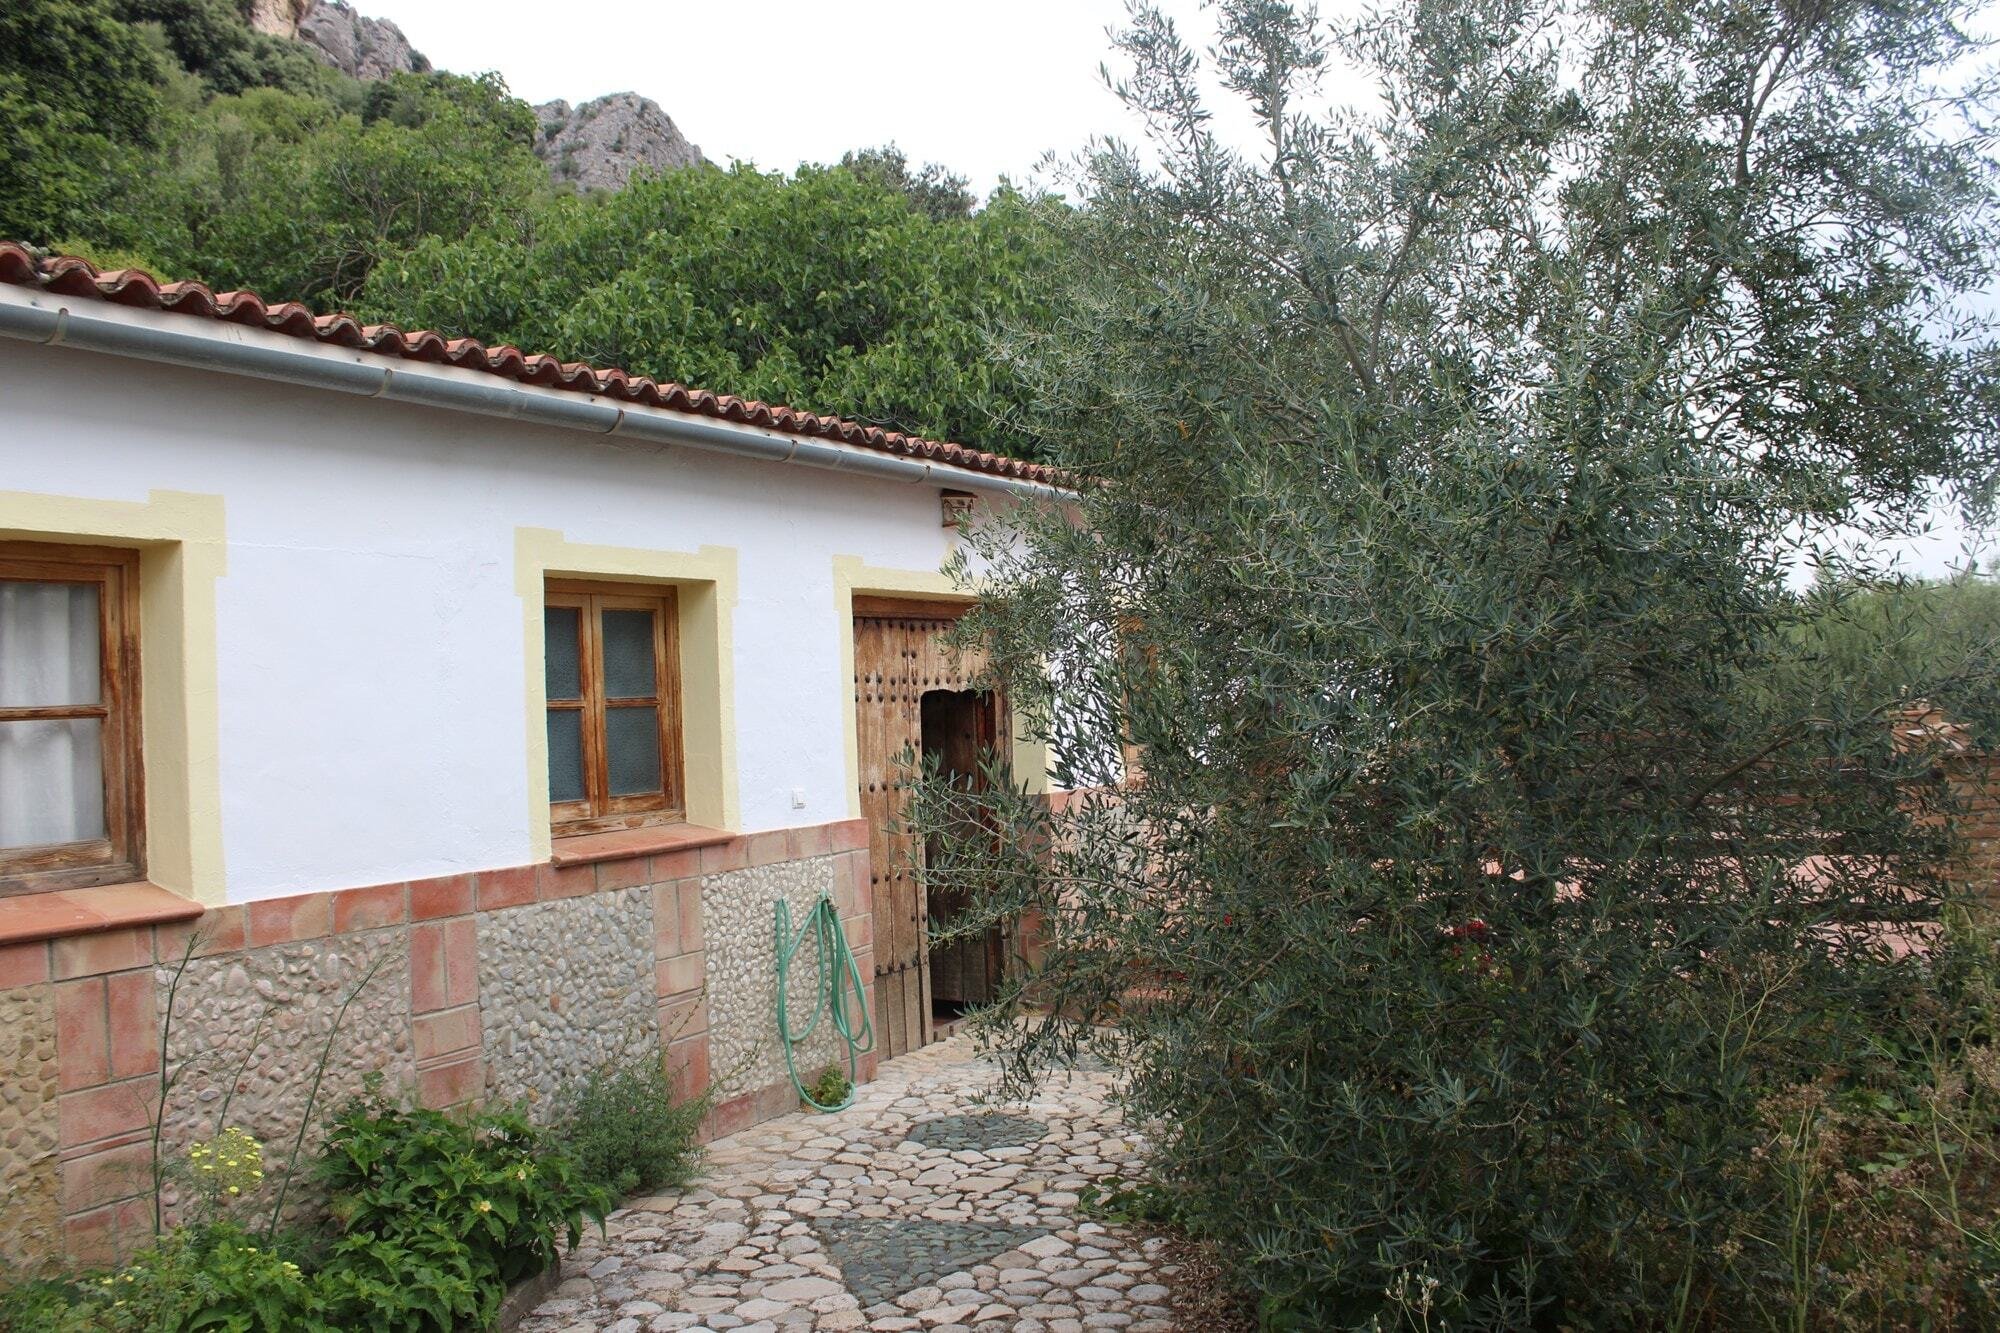 A CHARMING 4-BED, 4-BATH DETACHED HOUSE in Montejaque with garden and space for a pool - 120,000€